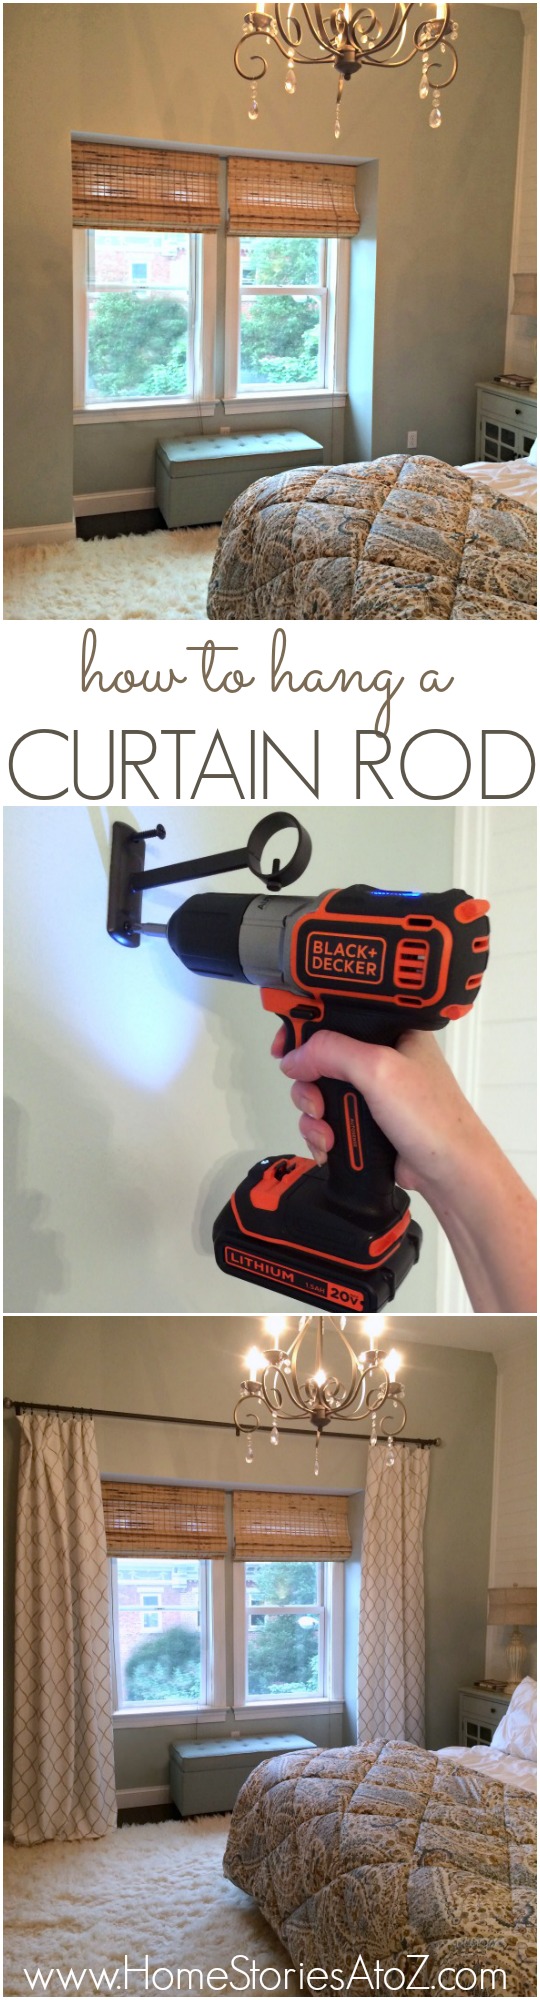 How to hang a curtain rod